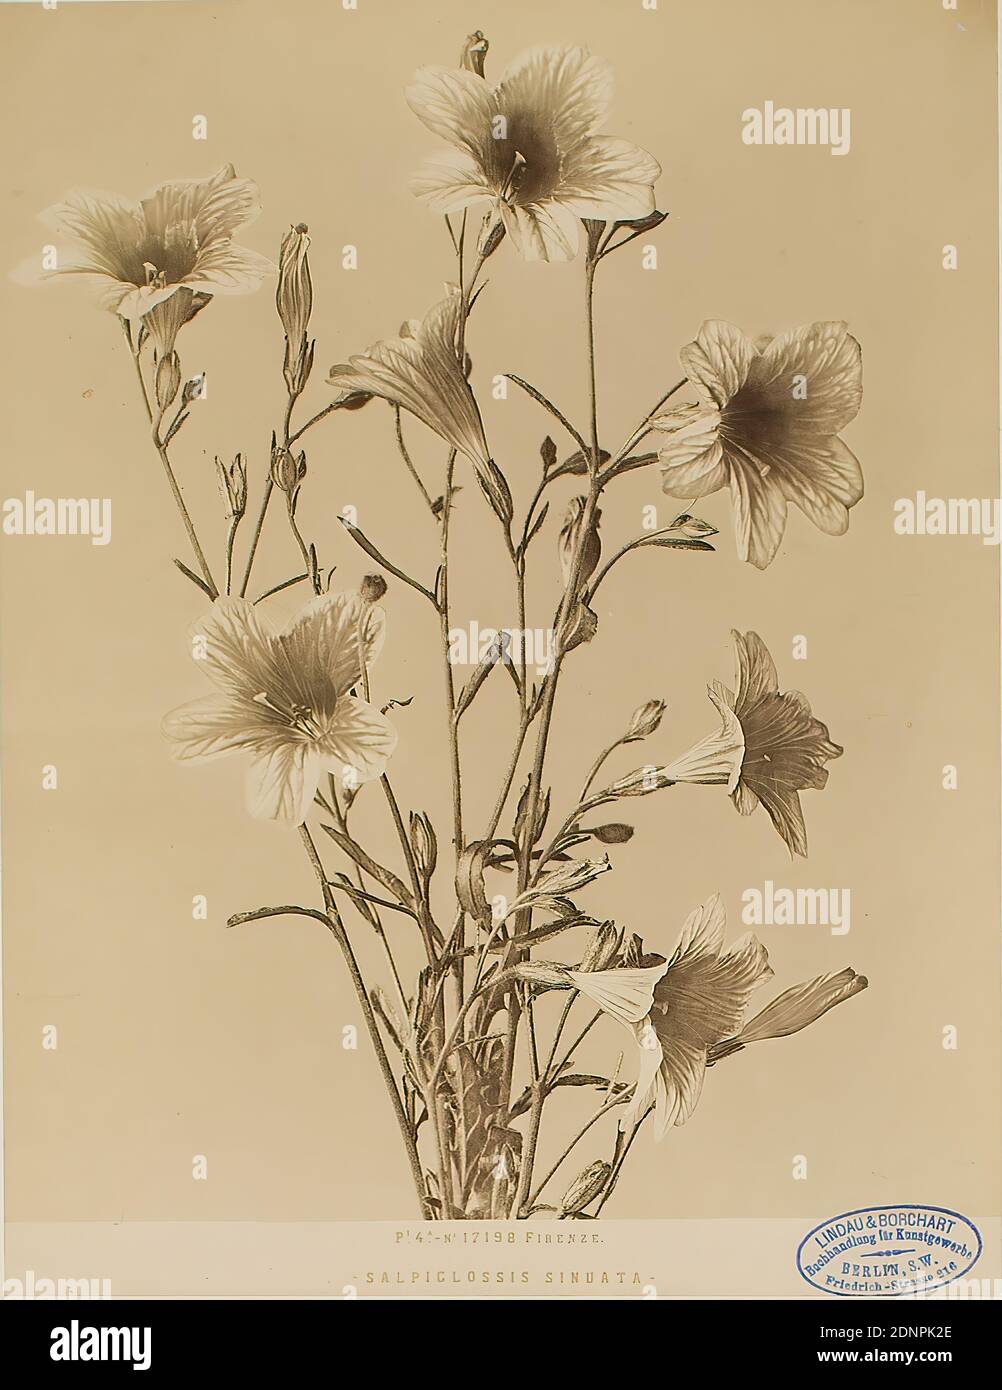 FIRENZE - SALPIGLOSSIS SINUATA -, albumin paper, black and white positive process, image size: height: 25,10 cm; width: 19,20 cm, titled: recto and center: copied in block letters: P. 4. FIRENZE - SALPIGLOSSIS SINUATA -, stamp: recto and right: in blue: Lindau & Borchart - Buchhandlung für Kunstgewerbe, Berlin S.W, Friedrich-Strasse 216, stamp: verso and center: photography, nature photography, flowers Stock Photo